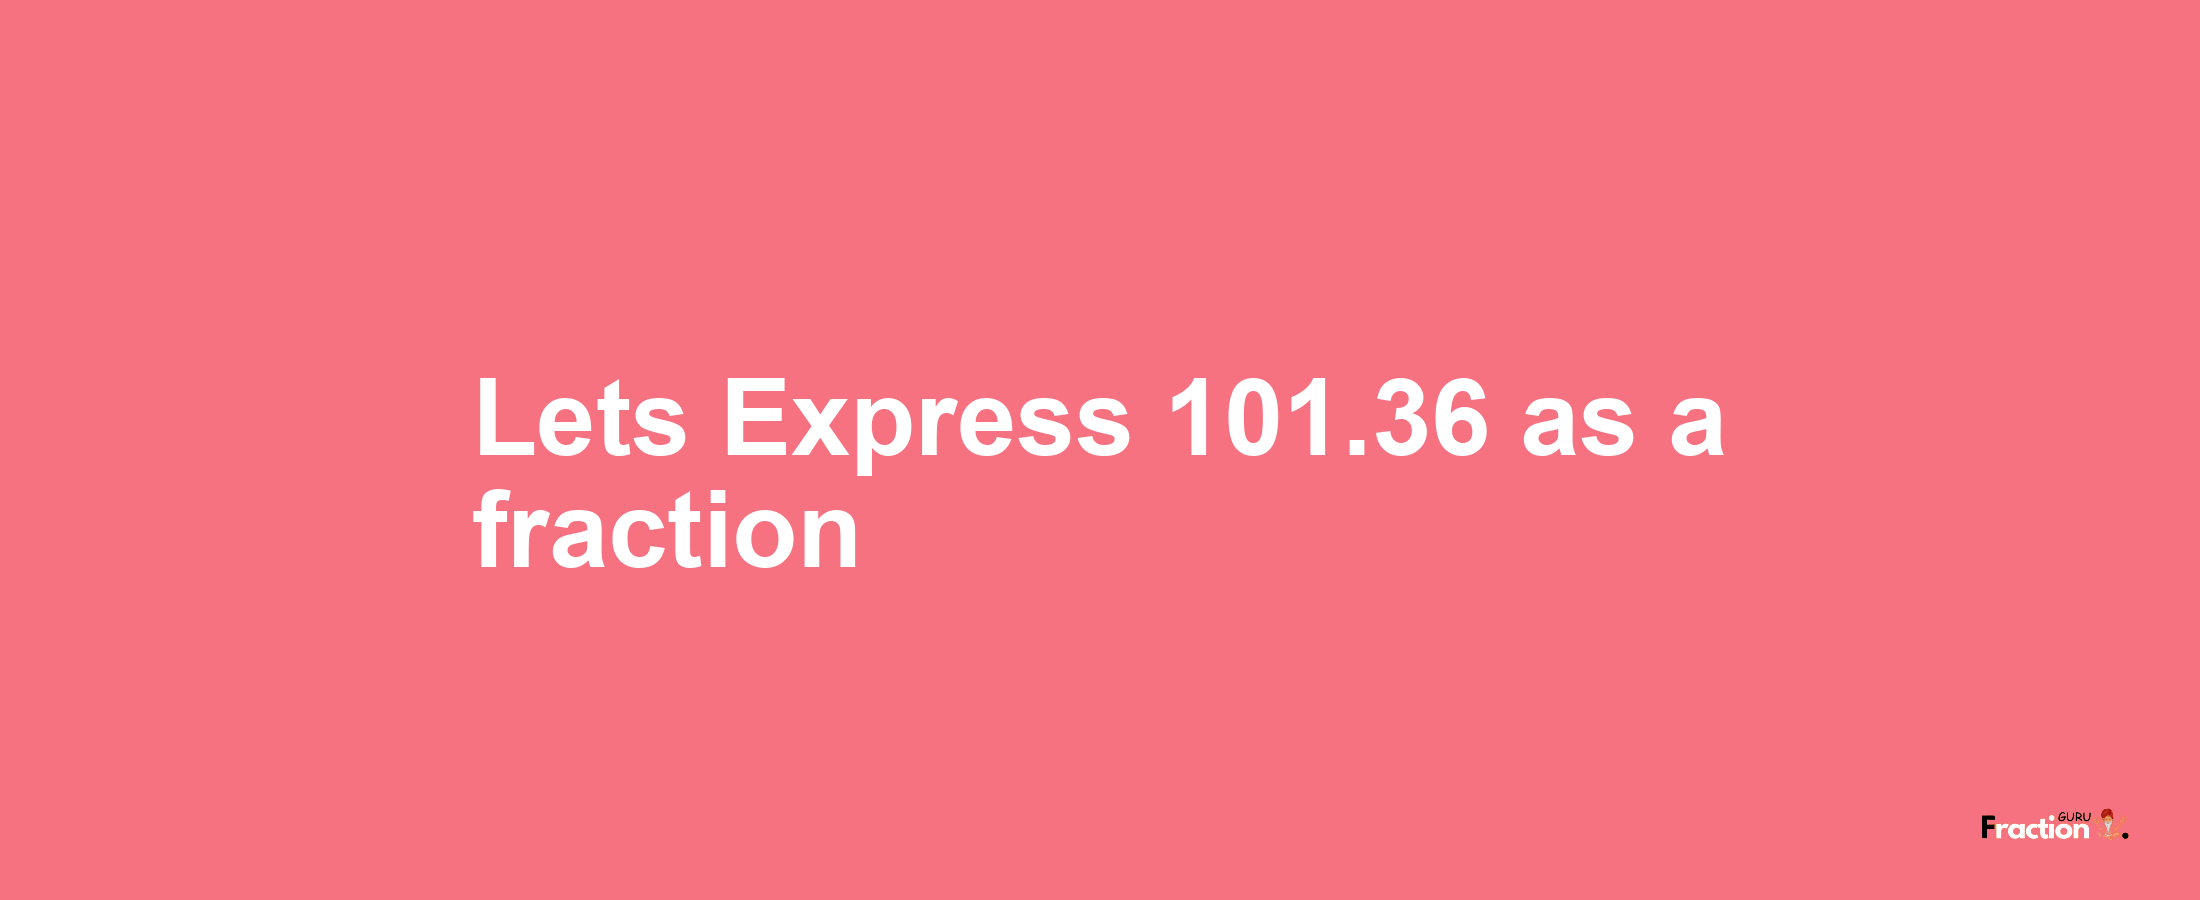 Lets Express 101.36 as afraction